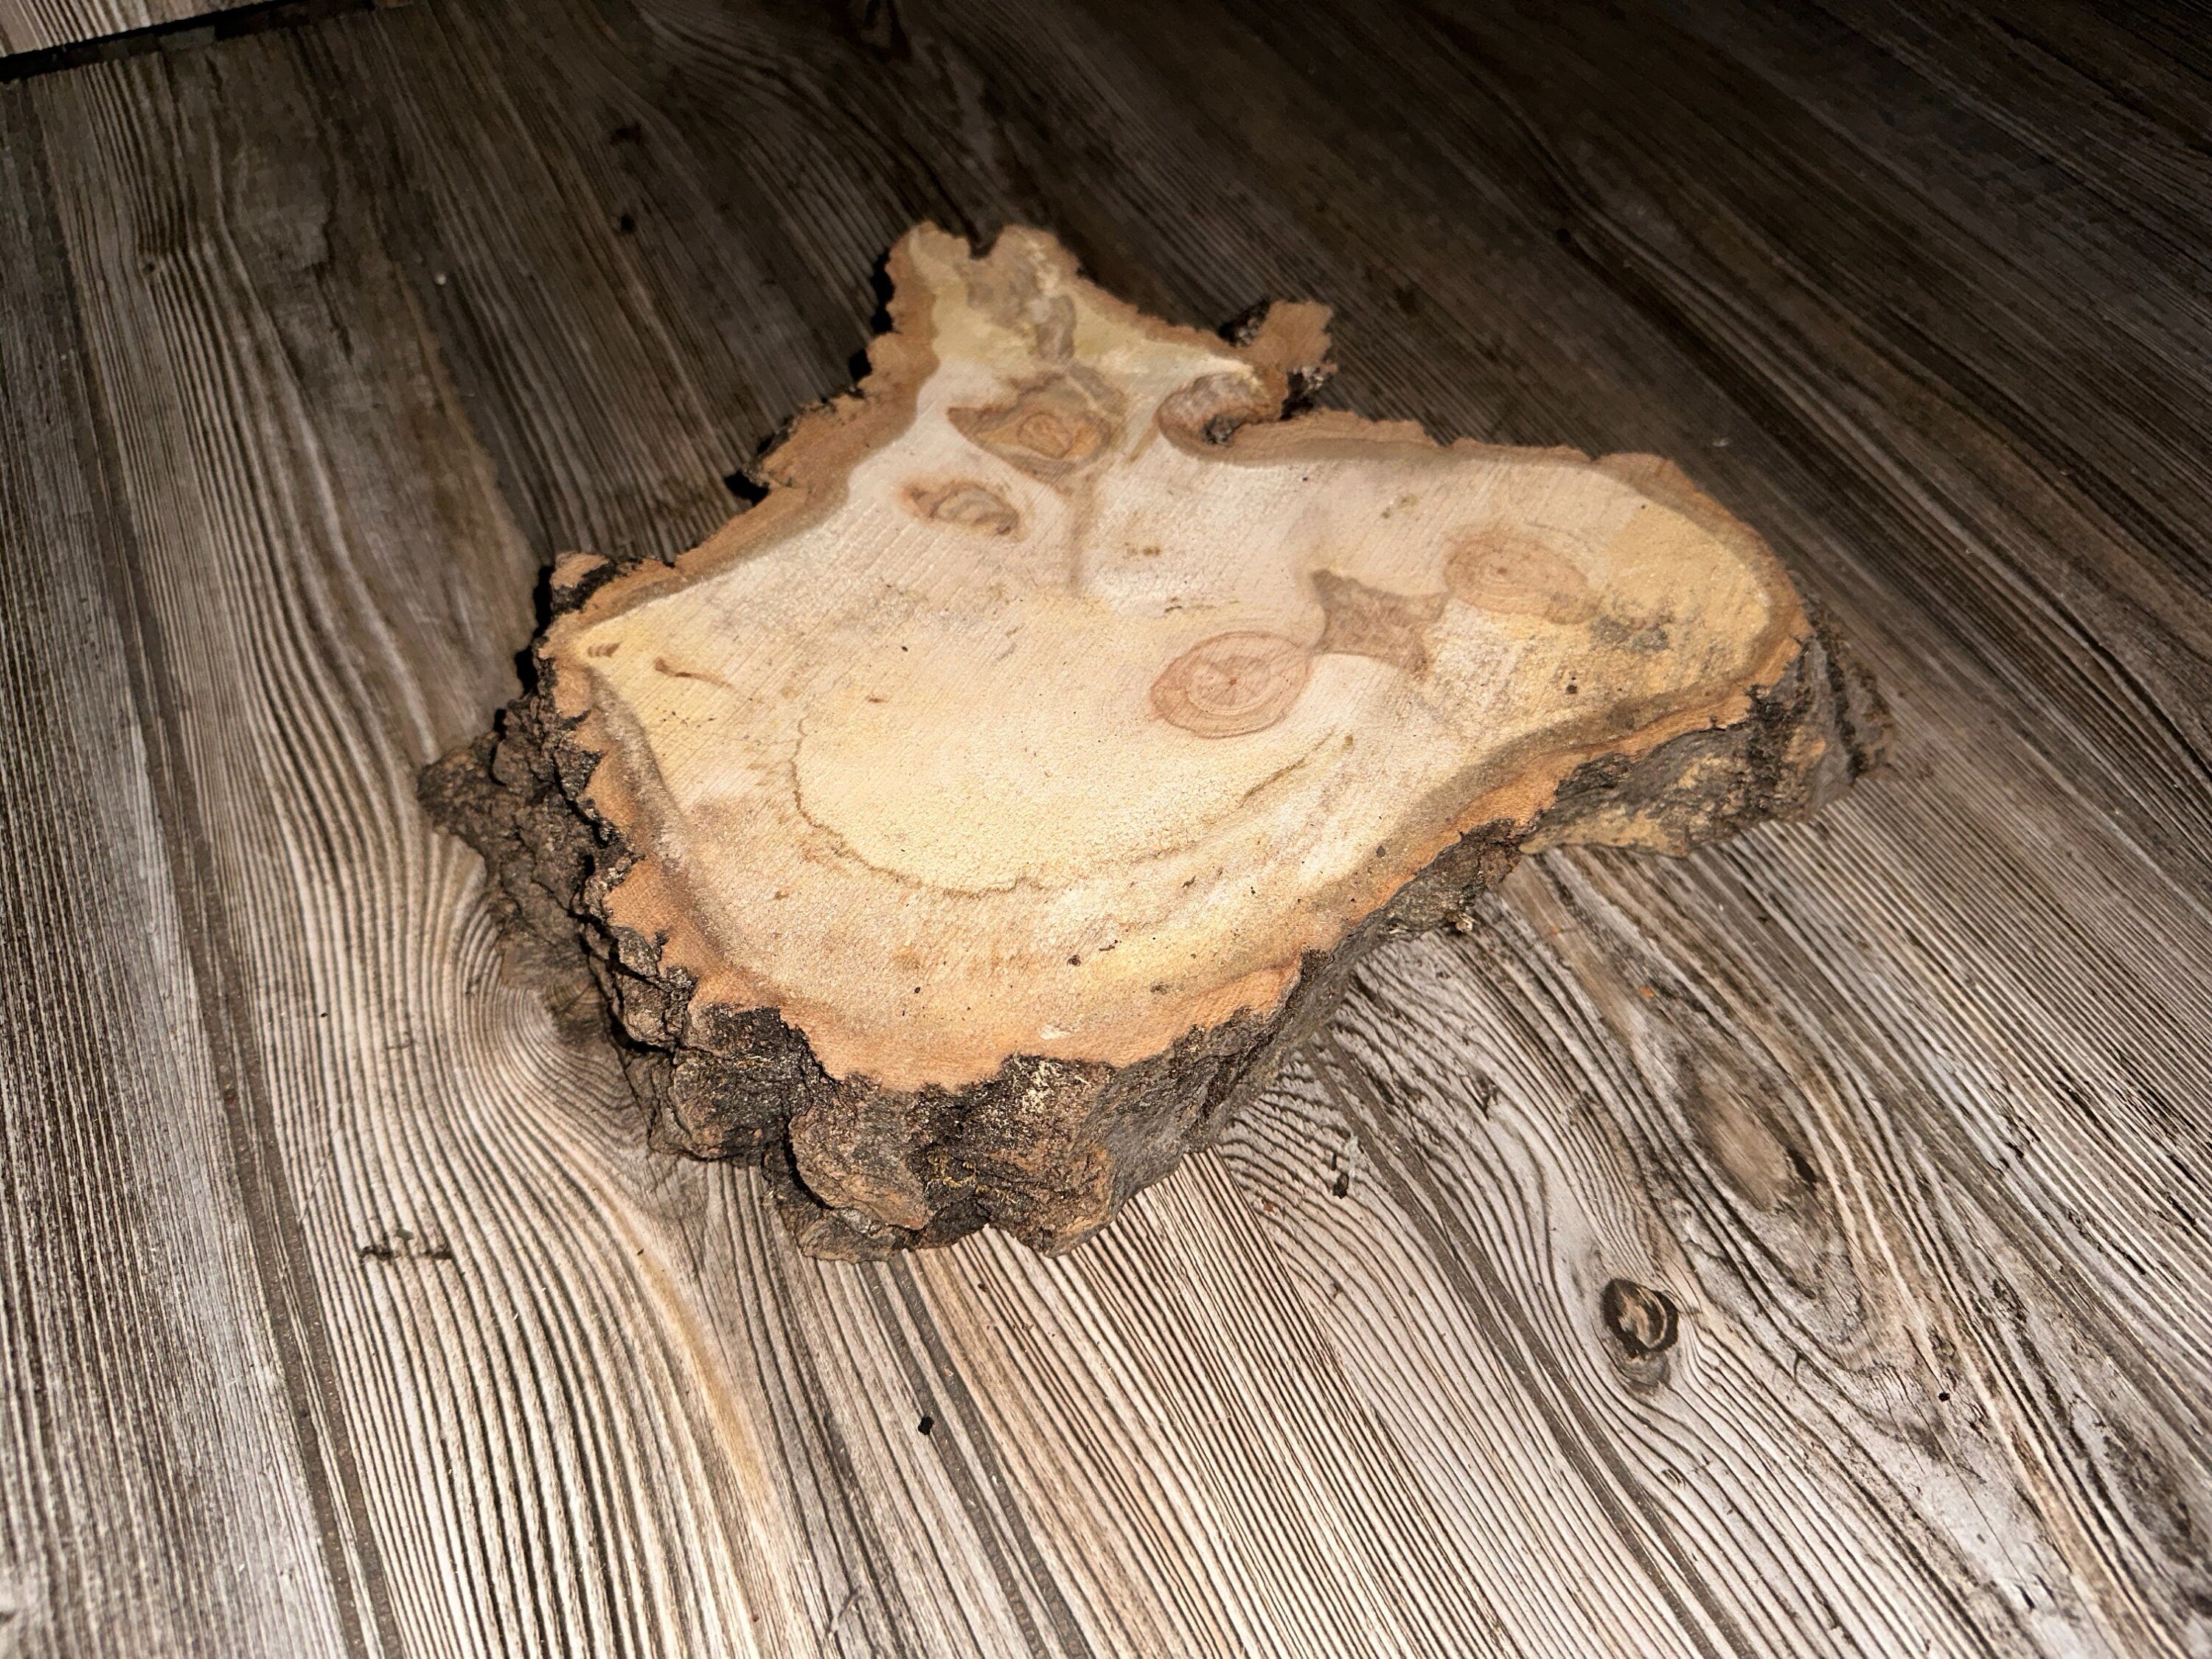 Unique Aspen Burl Slice, Approximately 14 Inches Long by 10 Inches Wide and 2 Inches Thick